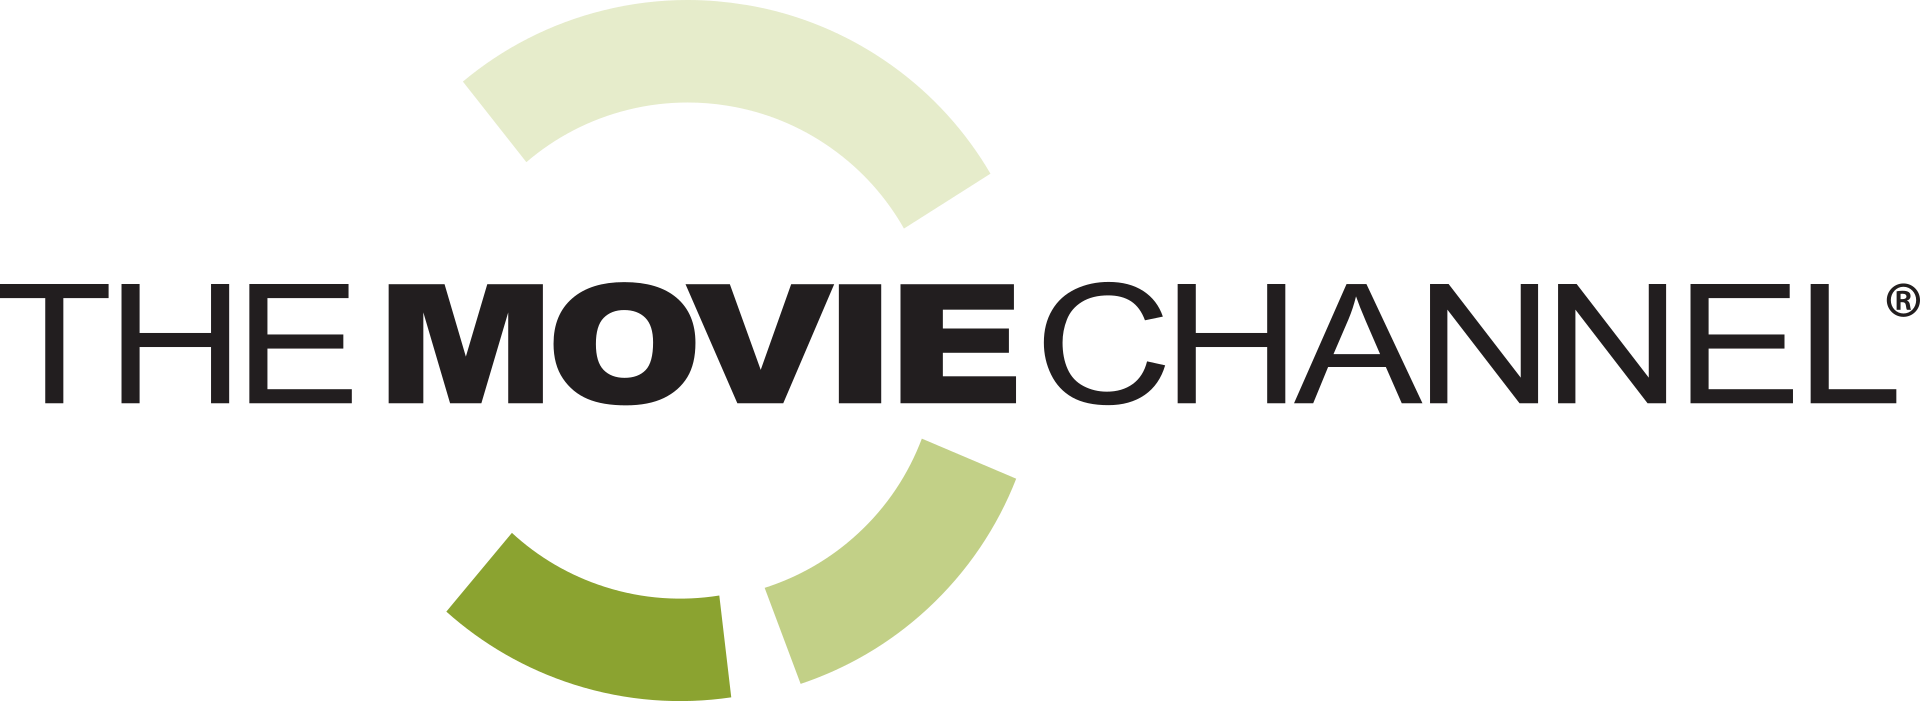 The_Movie_Channel.svg